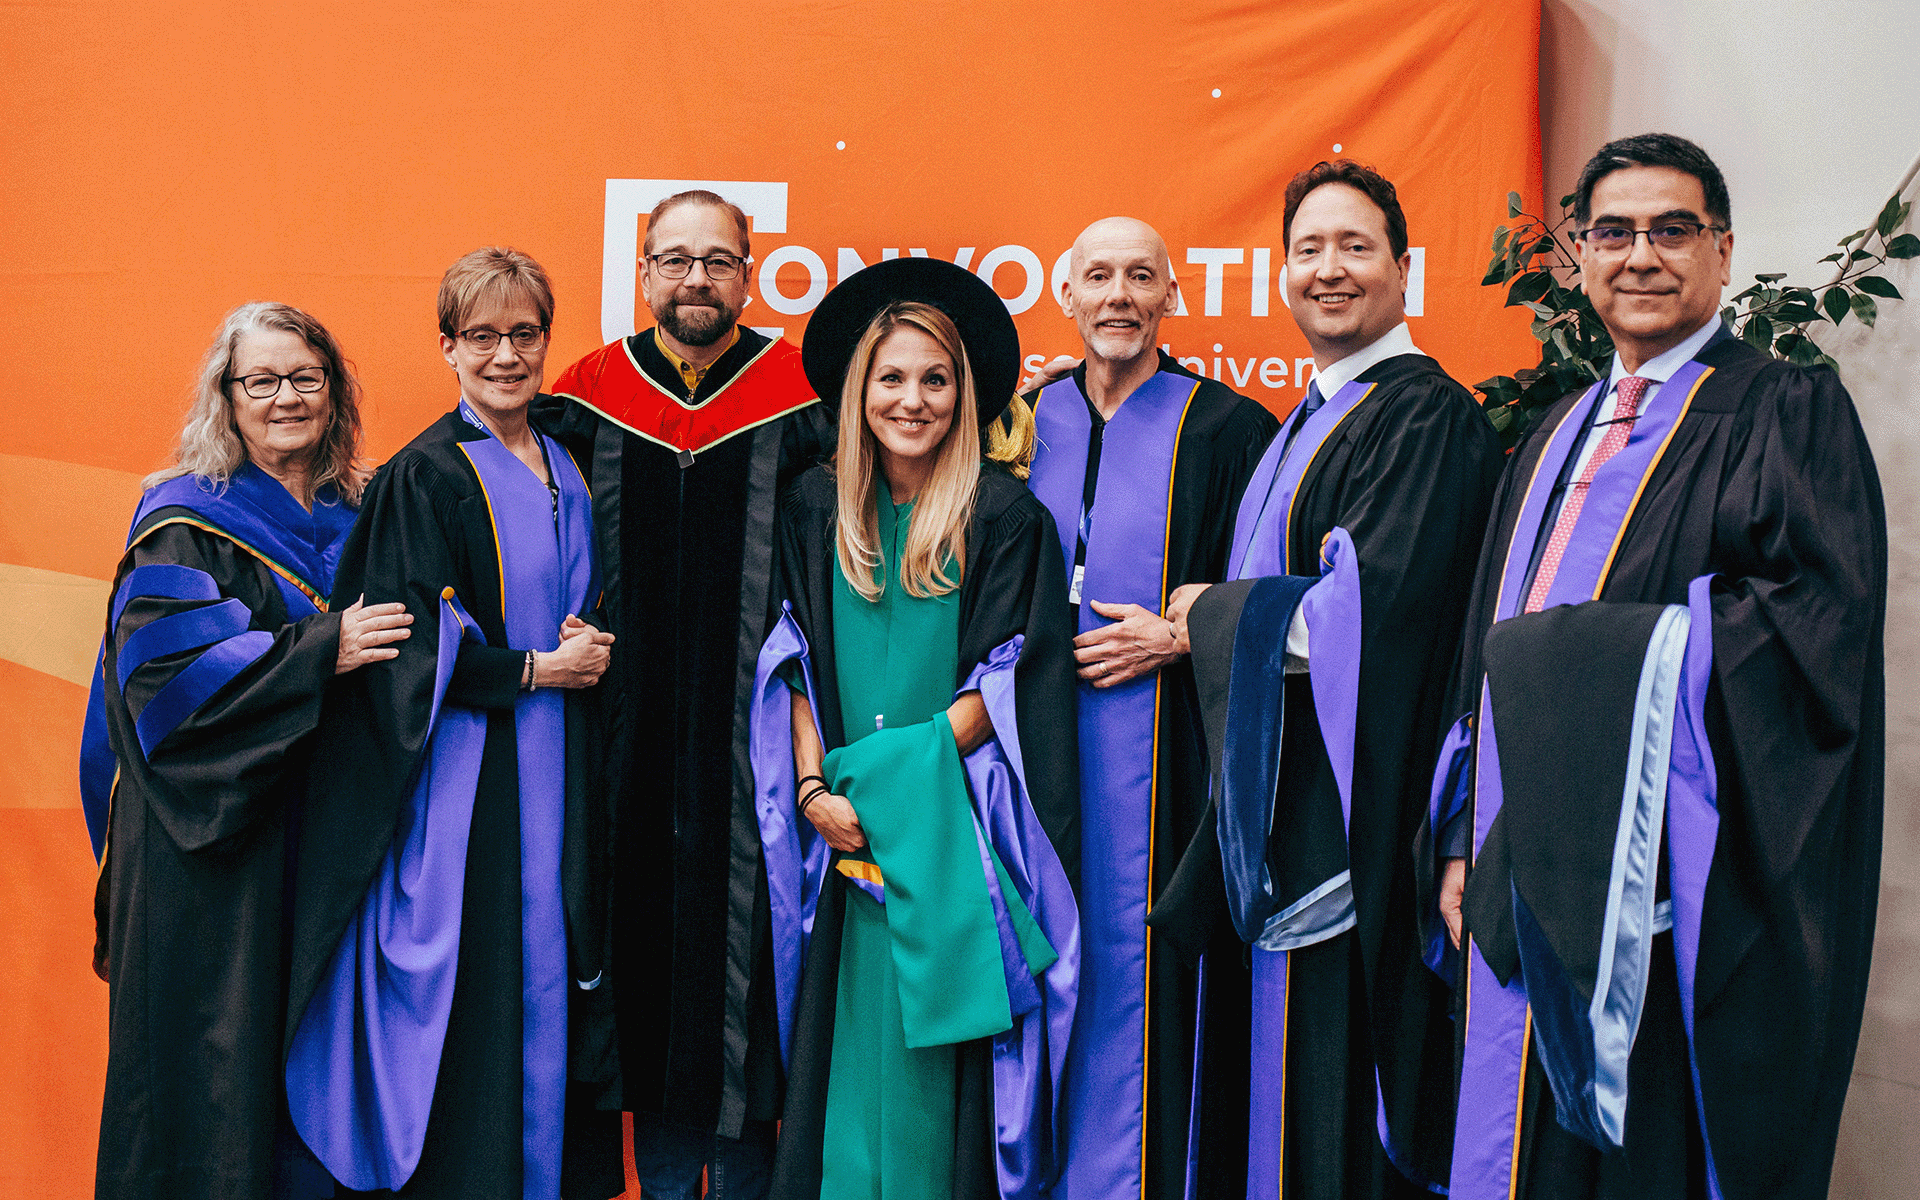 Group of people dressed in academic regalia smiling at the camera